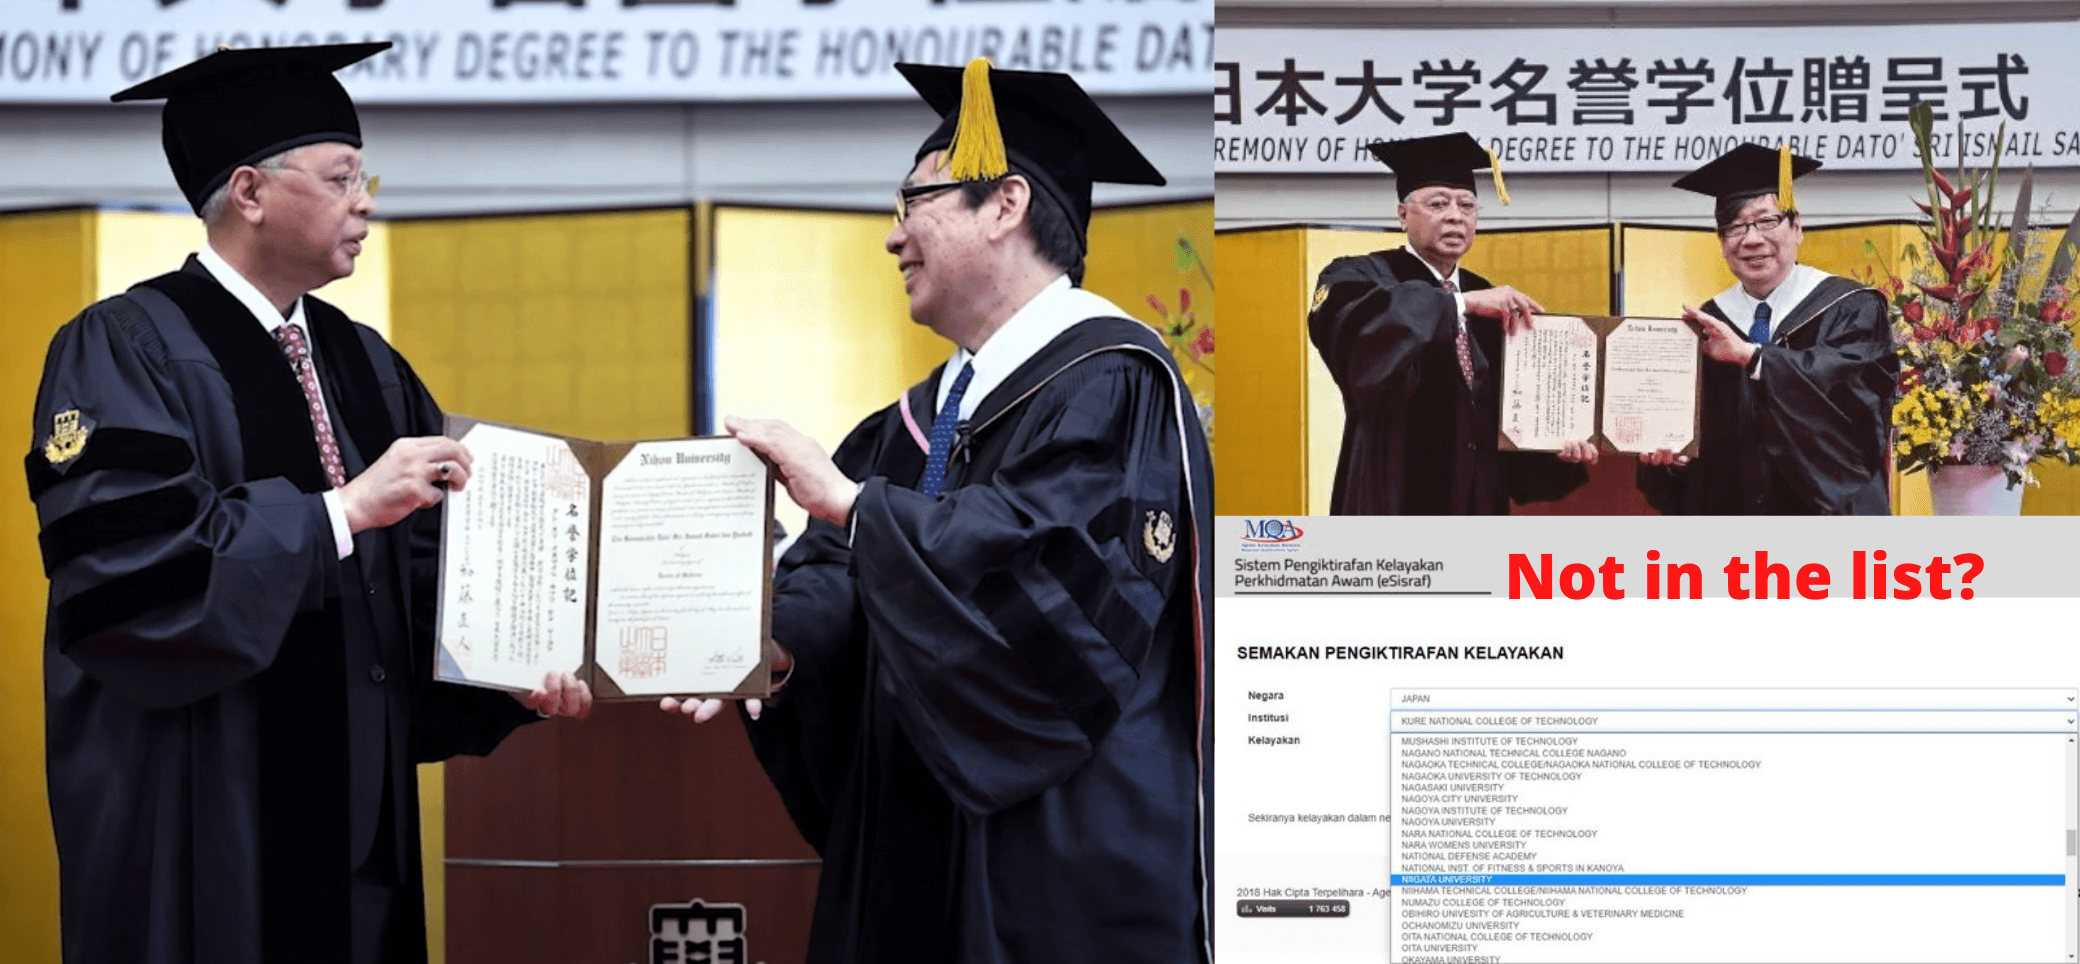 PM Ismail Sabri 'Called Out' As MQA Doesn’t Recognise His Awarded Honorary Medical Degree